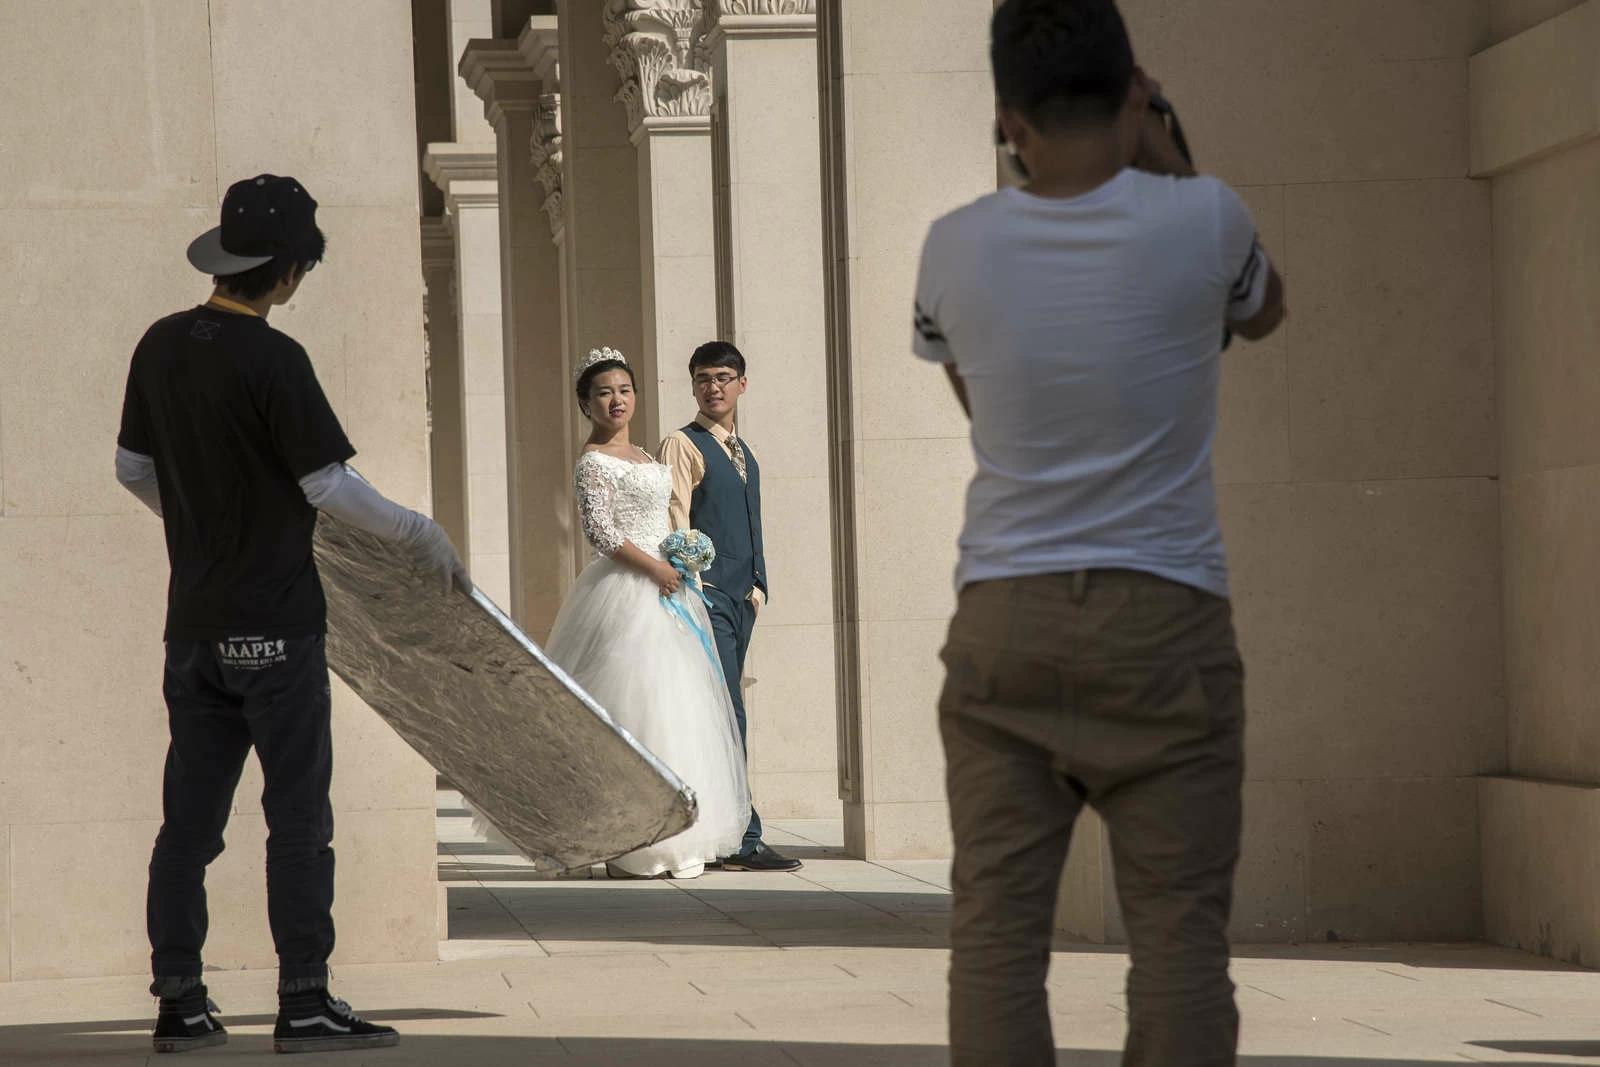 A couple in wedding dress poses for pictures in a archway at Dalian’s “City of Water”. The ?City of Water? also dubbed ?Venice of the East? or the ?Oriental Venice? is a large touristic project in Dalian?s Donggang business district stretching over 400,000 square meters with a replica of Venice and other European-style architecture buildings. Photo and story credits by Thierry Falise